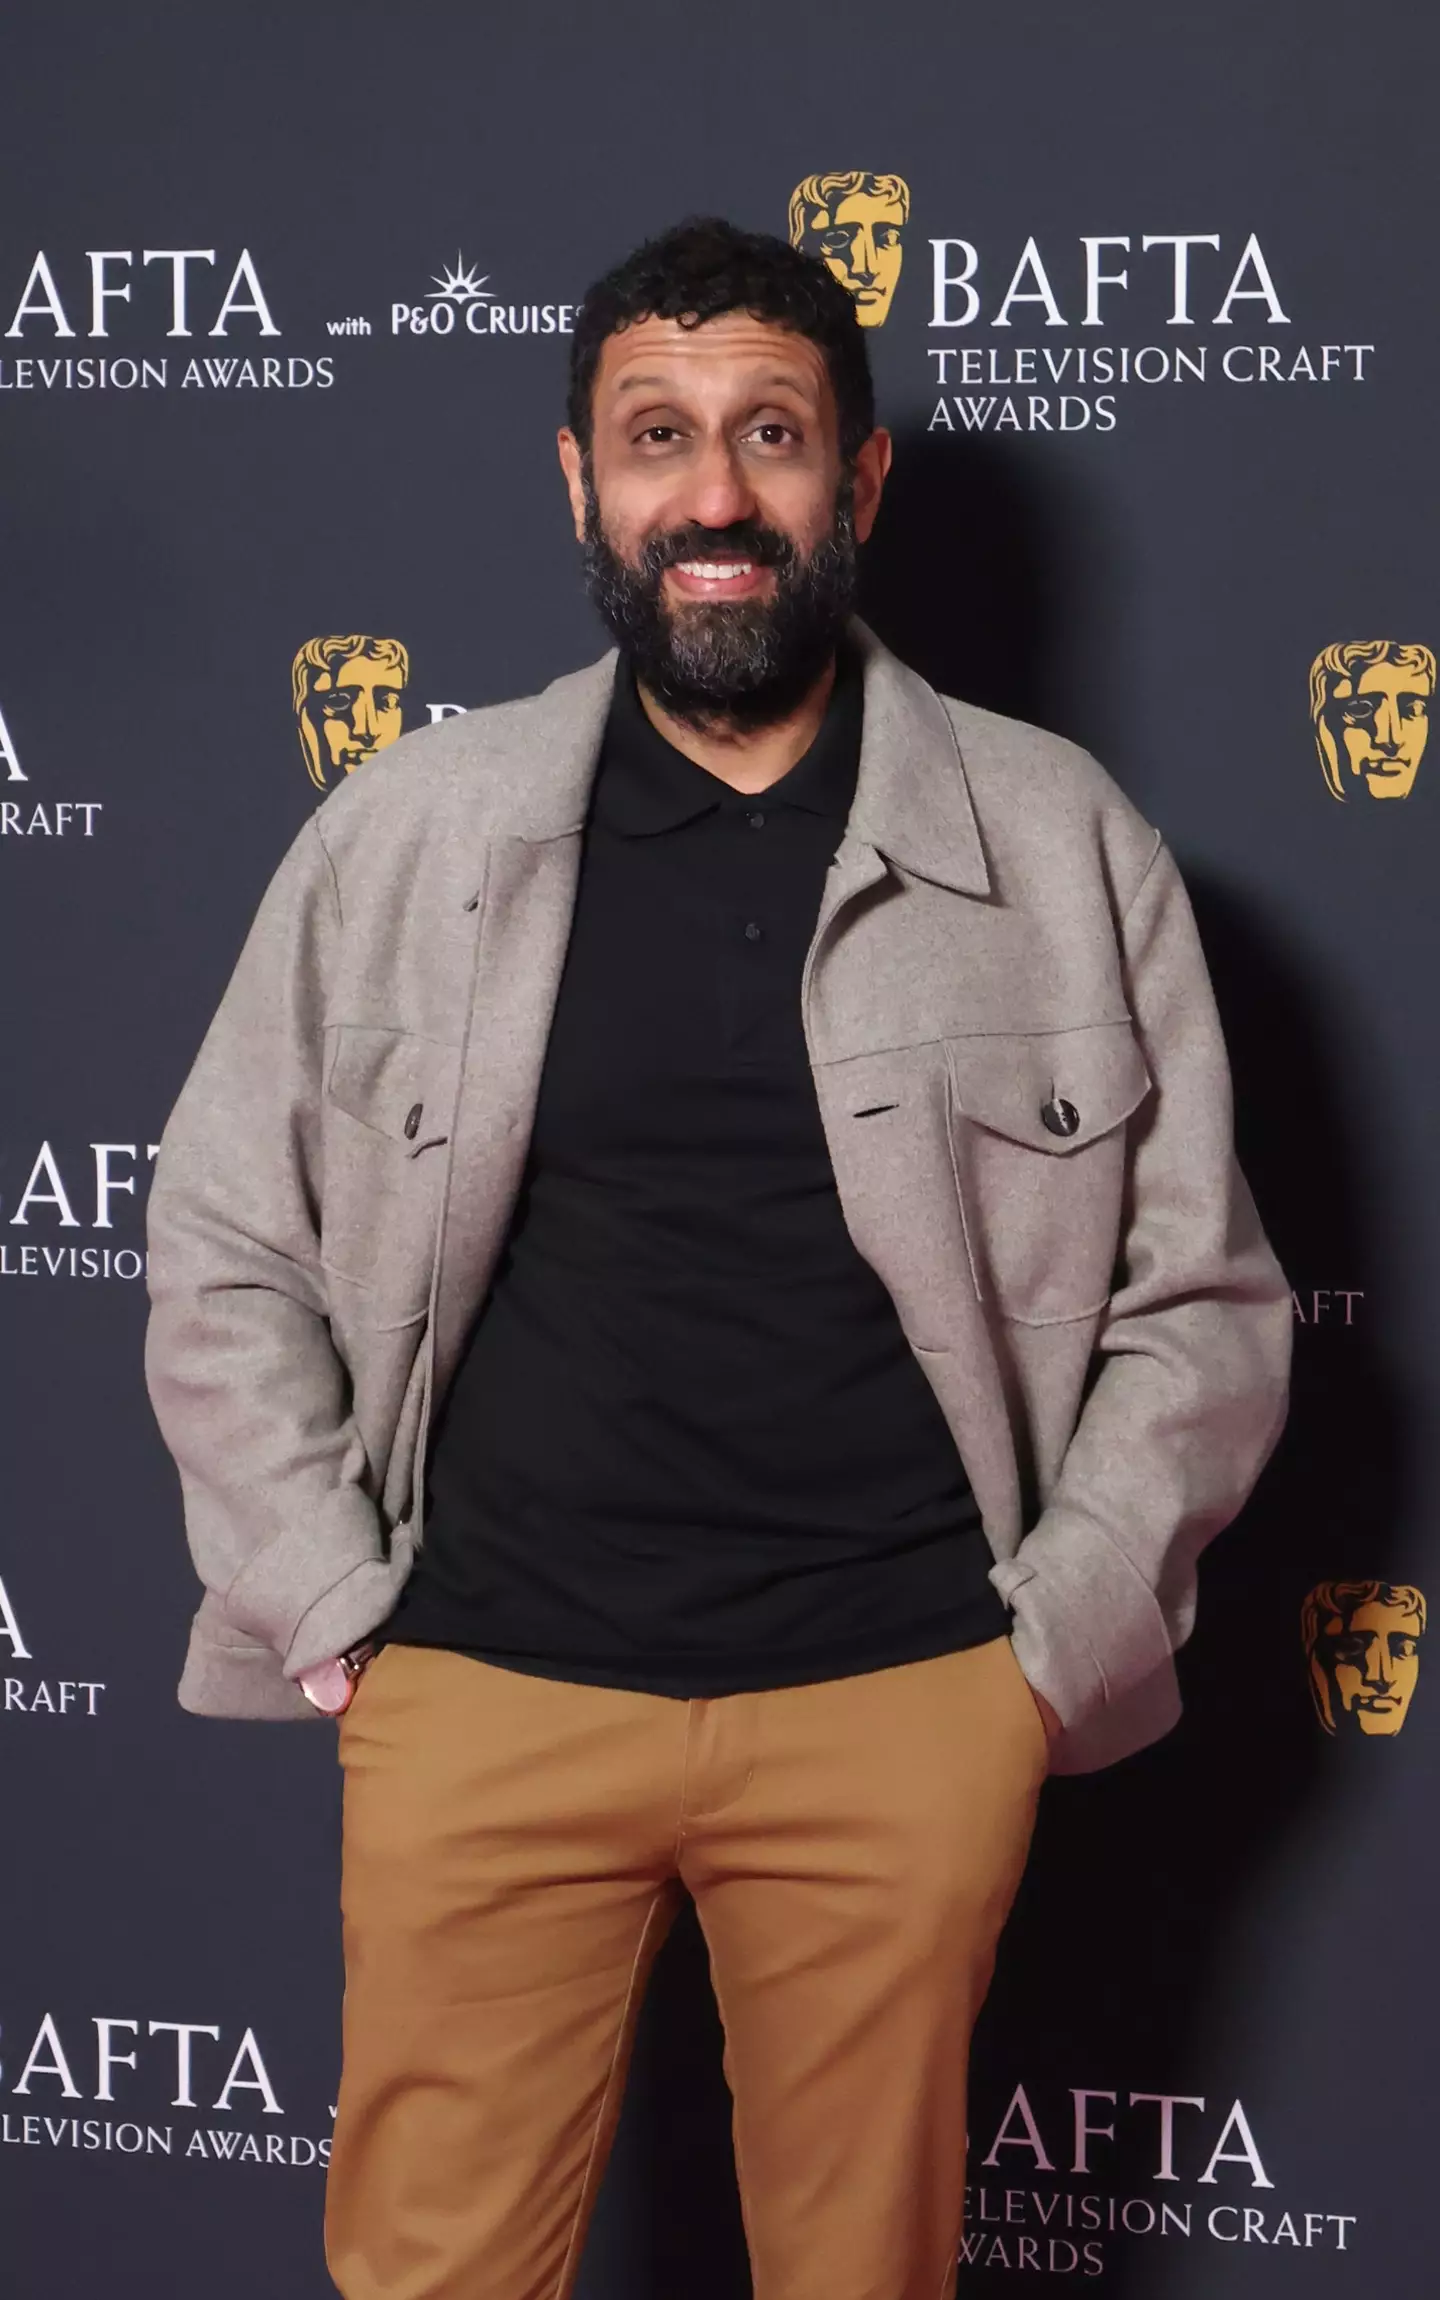 Adeel Akhtar starred in 2010 comedy/drama Four Lions.